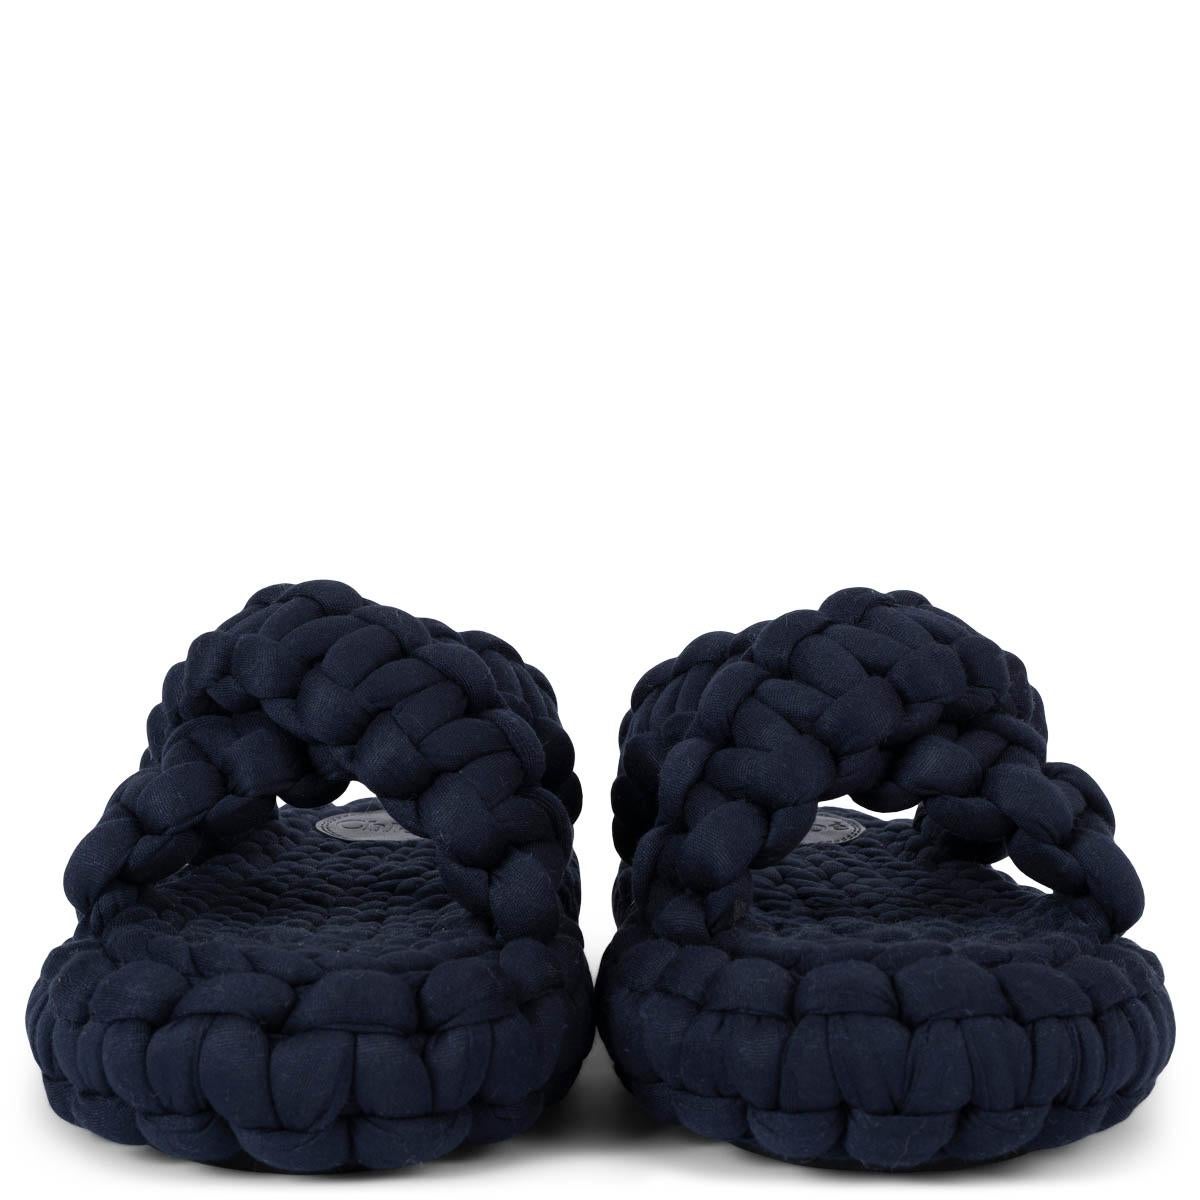 100% authentic Chloé Kamy braided slides are repurposes strips of navy blue leftover jersey. The design features crossover straps and covered platform soles. Brand new. Come with dust bags. 

Measurements
Imprinted Size	37
Shoe Size	37
Inside